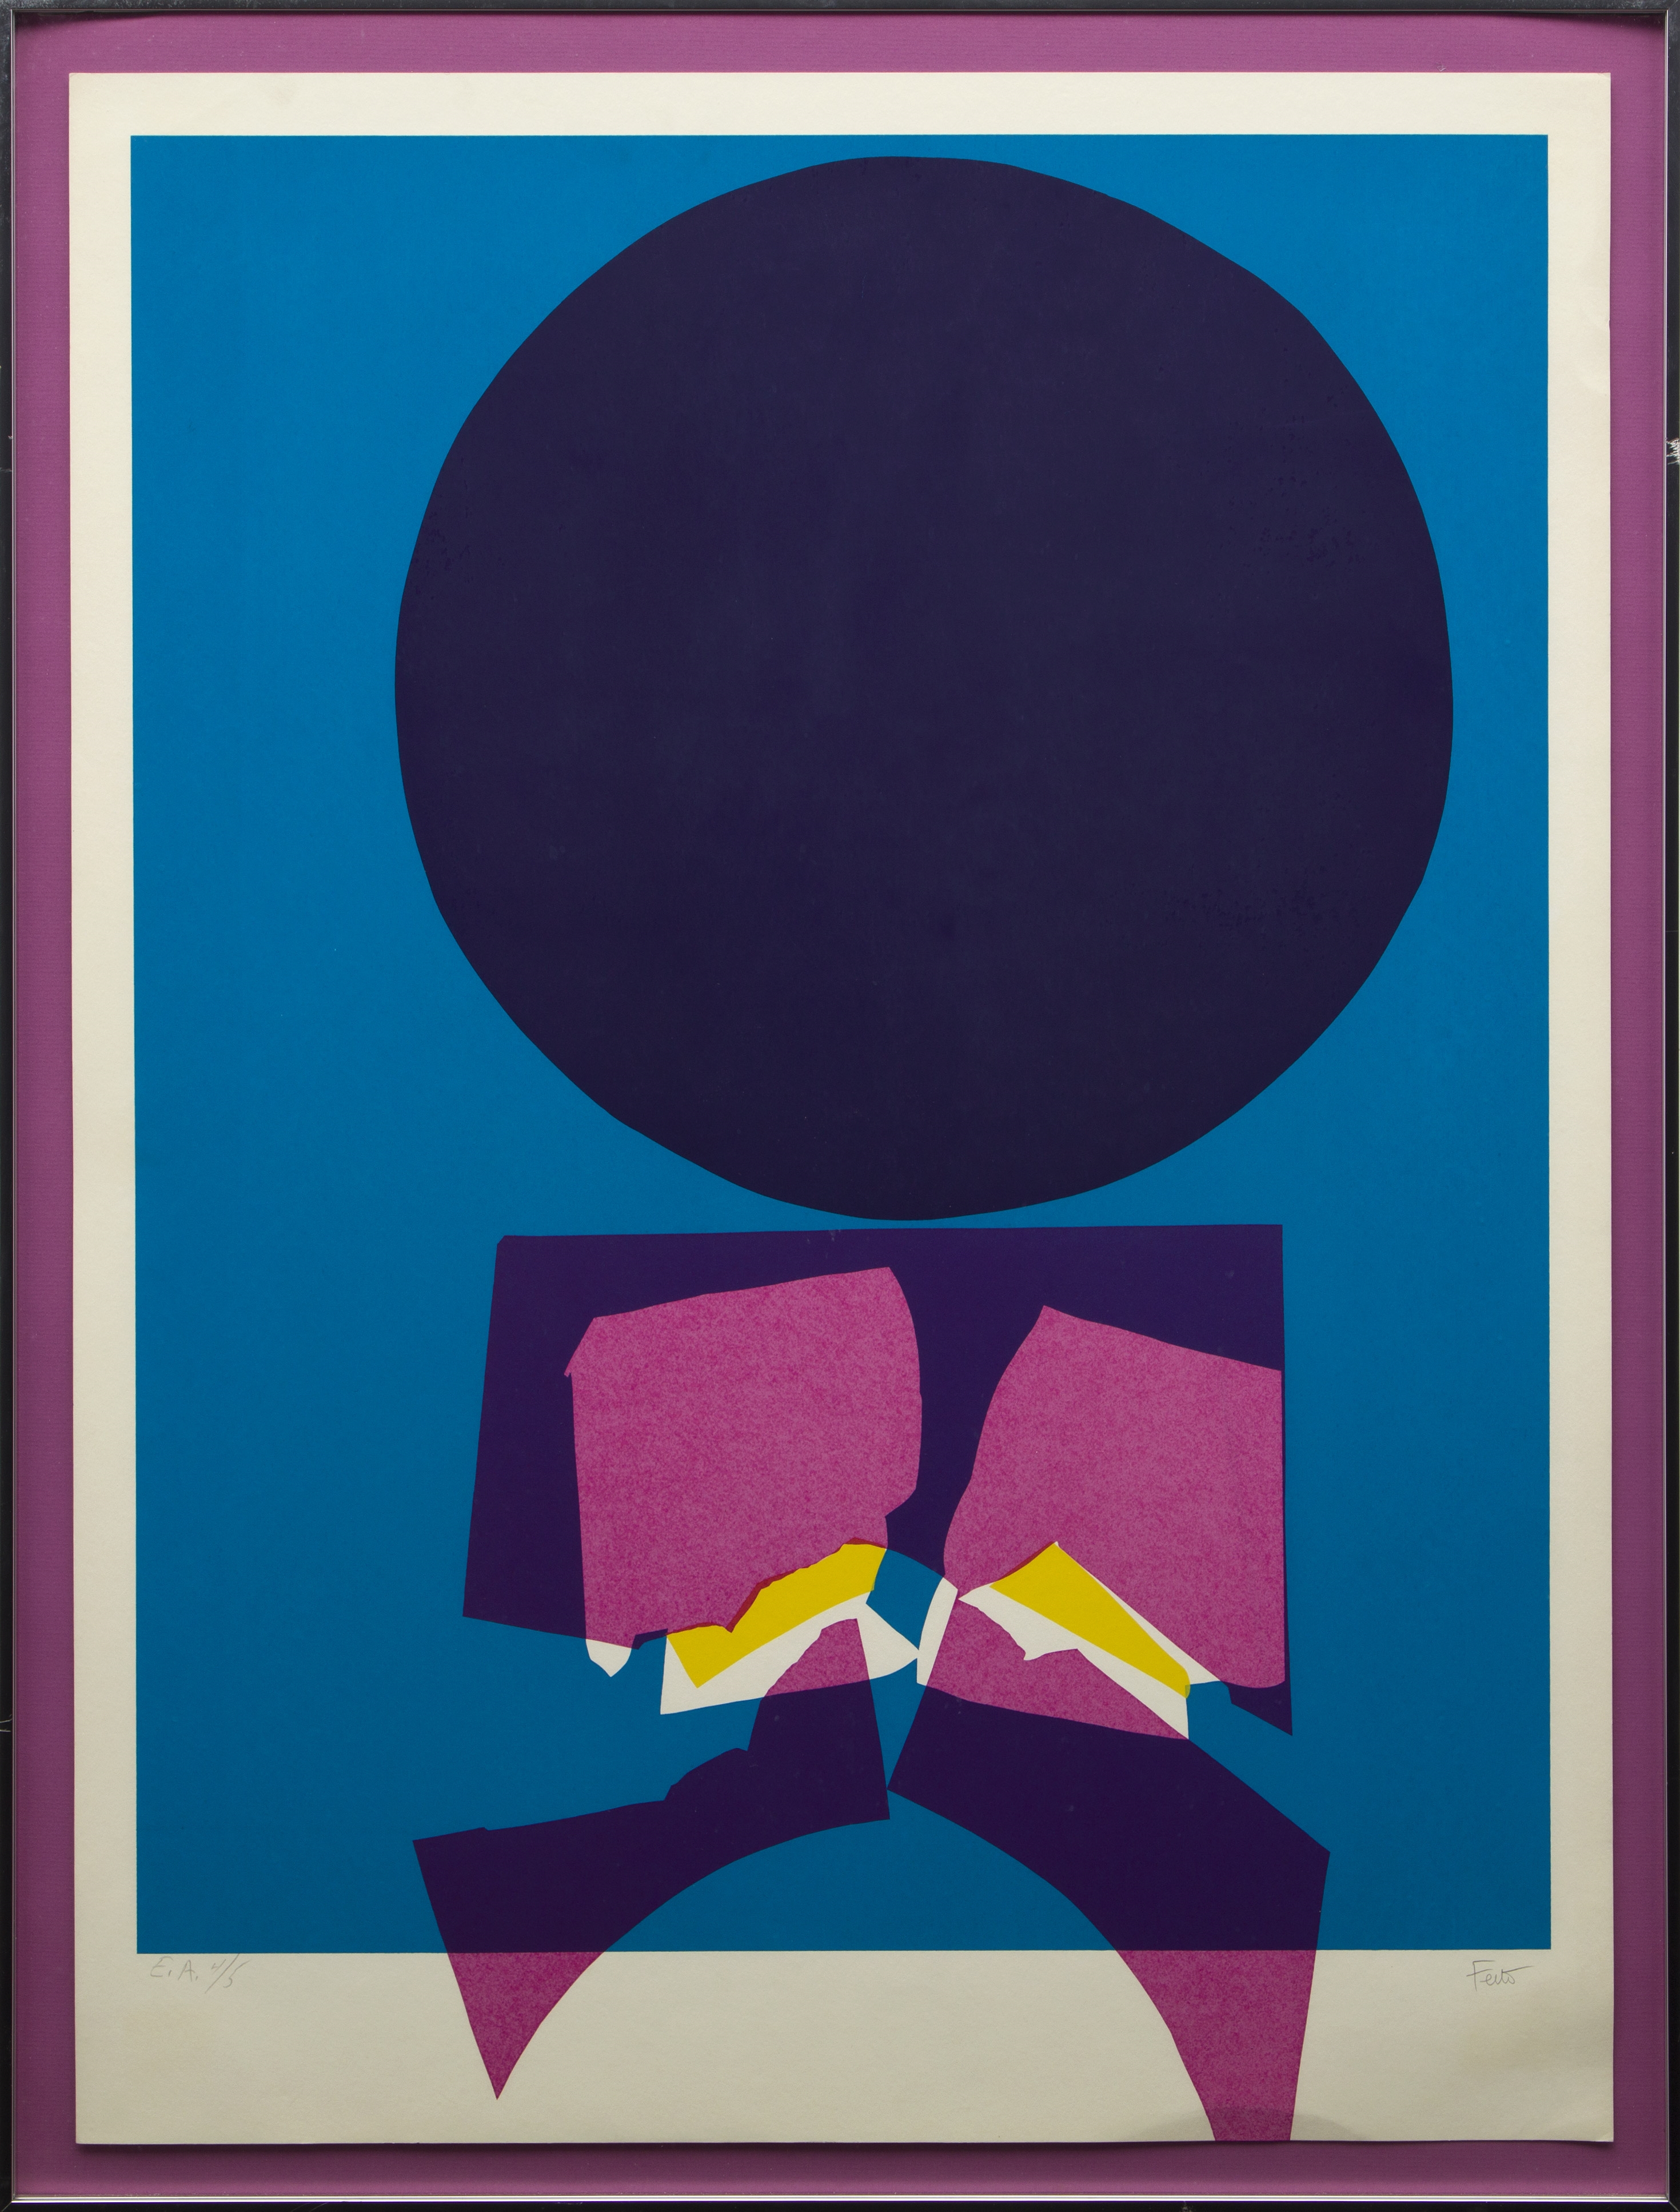 Artwork by Luis Feito, Sans titre / Untitled, Made of Color silkscreen